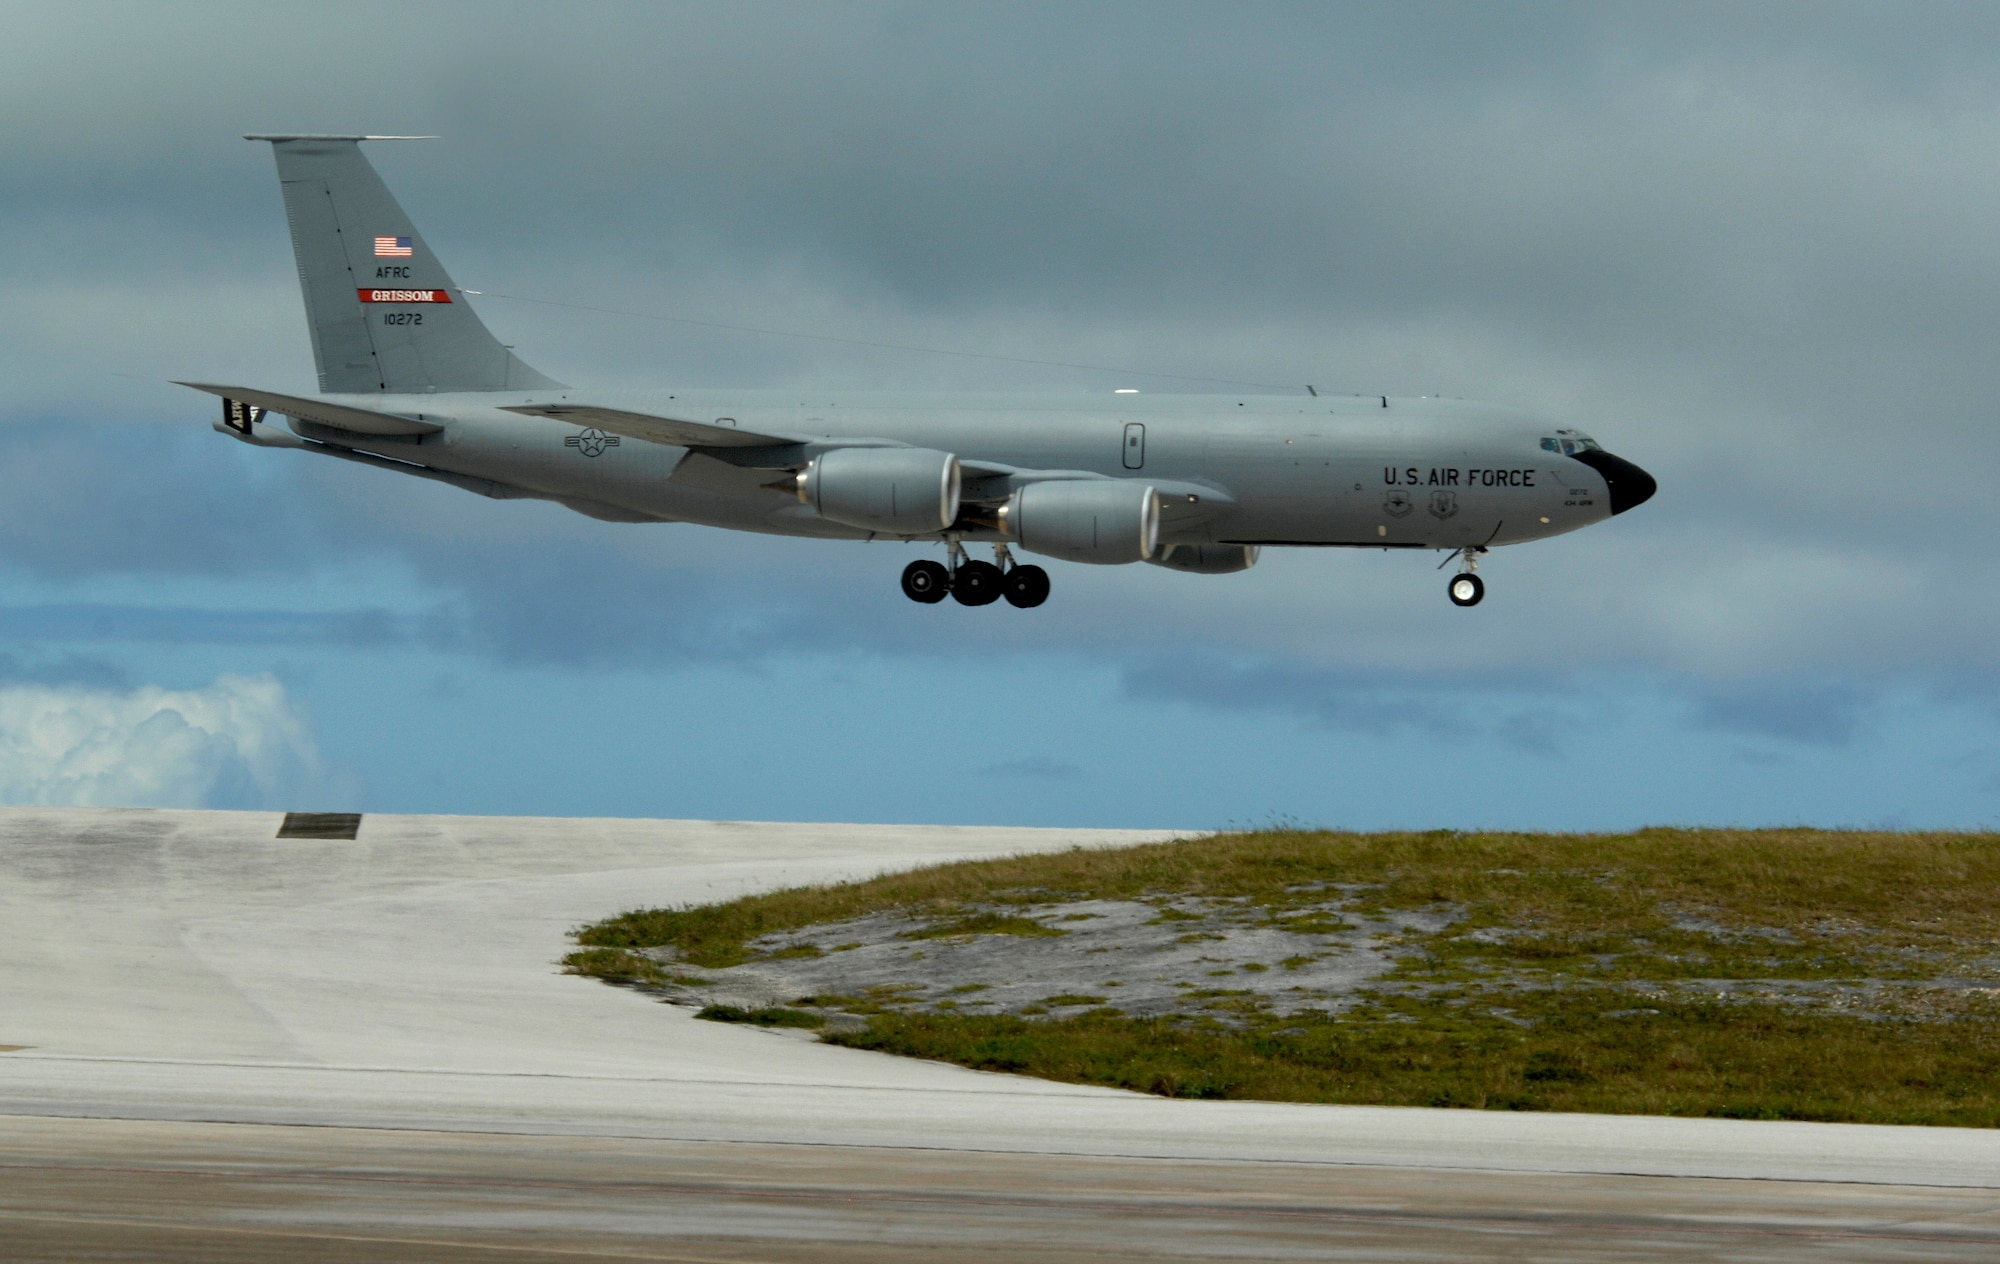 A KC-135R Stratotanker, 434th Air Refueling Wing Grissom Air Reserve Base, Ind., lands at Andersen Air Force Base, Guam Dec. 31. The 434th Air Refueling Wing from Grissom ARW is deployed to Andersen to provide Pacific theater refueling operations and is replacing the 171st ARW Pennsylvania Air National Guard.

(U.S. Air Force photo/ Master Sgt. Kevin J. Gruenwald) released






















  












 











































  












 

























